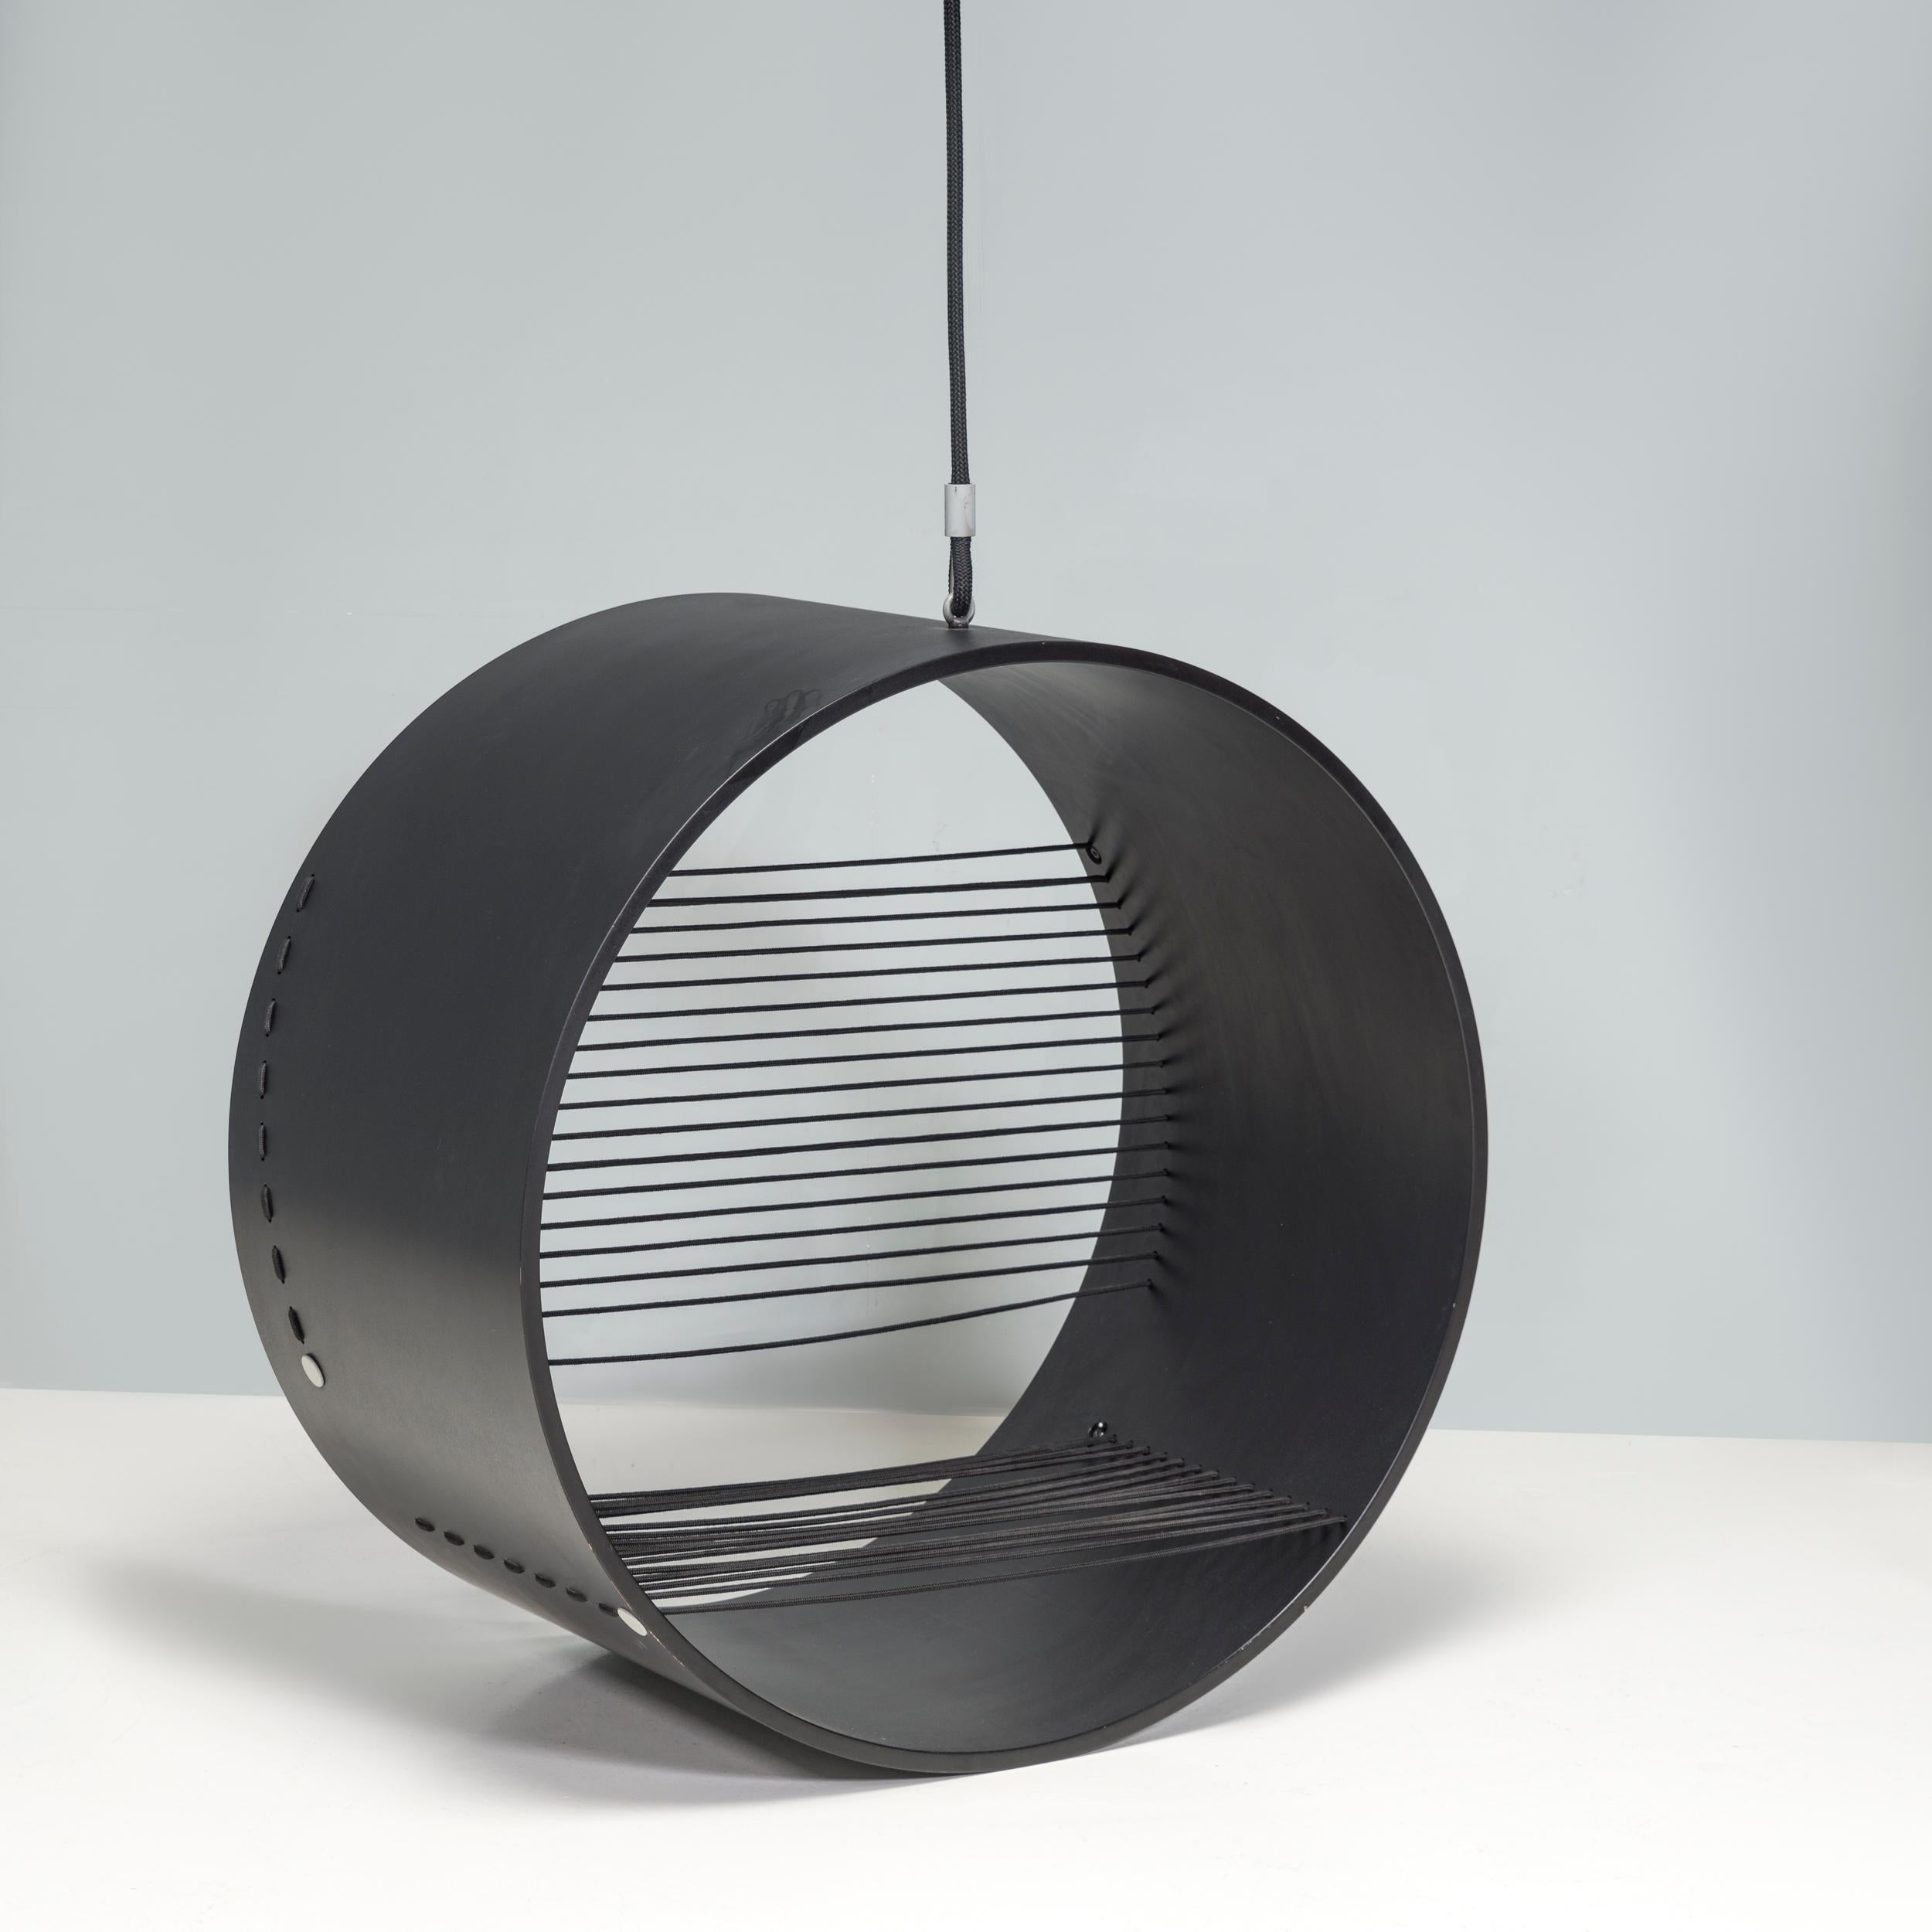 Designed by Danish interior and furniture designer Hanne Kortegaard, the Anello hanging chair is a statement piece.

Constructed from moulded black oak, the large hoop-like shape forms the frame of the seat, which hangs suspended from the ceiling